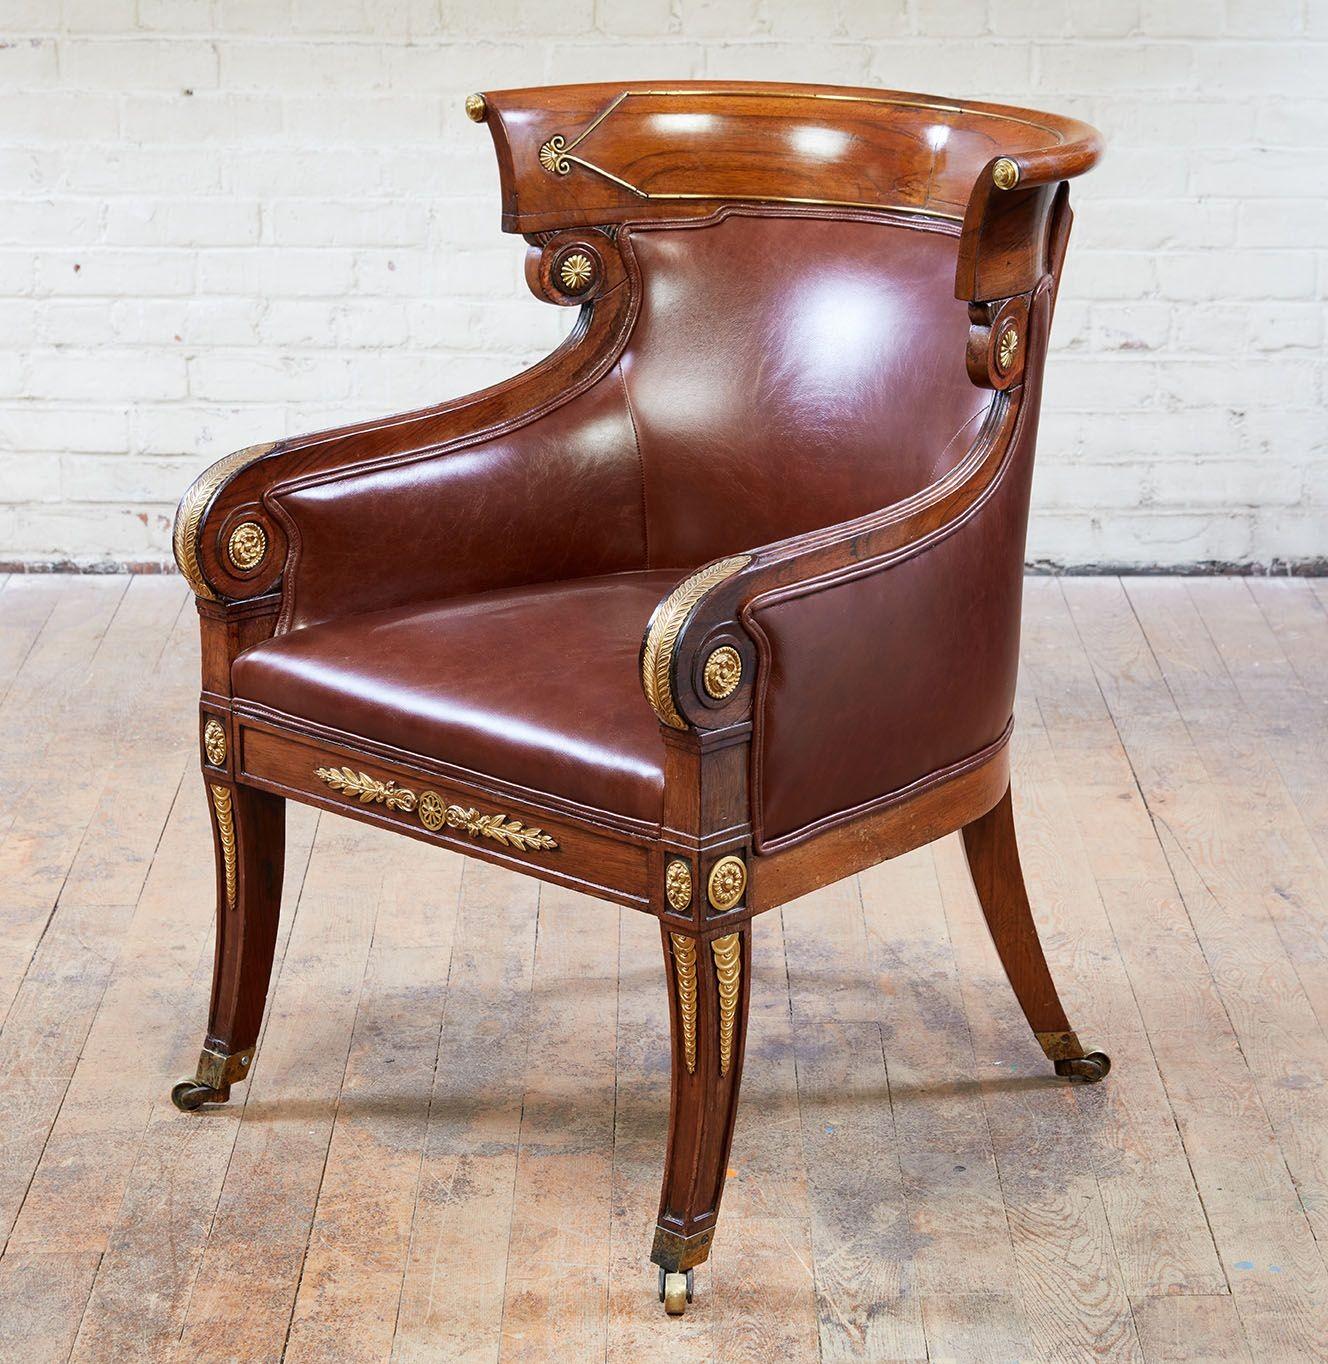 Fine Regency rosewood and gilt brass armchair in the manner of Morel and Hughes, having curved back with gilt brass mounts over scrolled arms with gilt longleaf mounts, over scrolled legs having gilt roundels and gilt money in tapering form down the